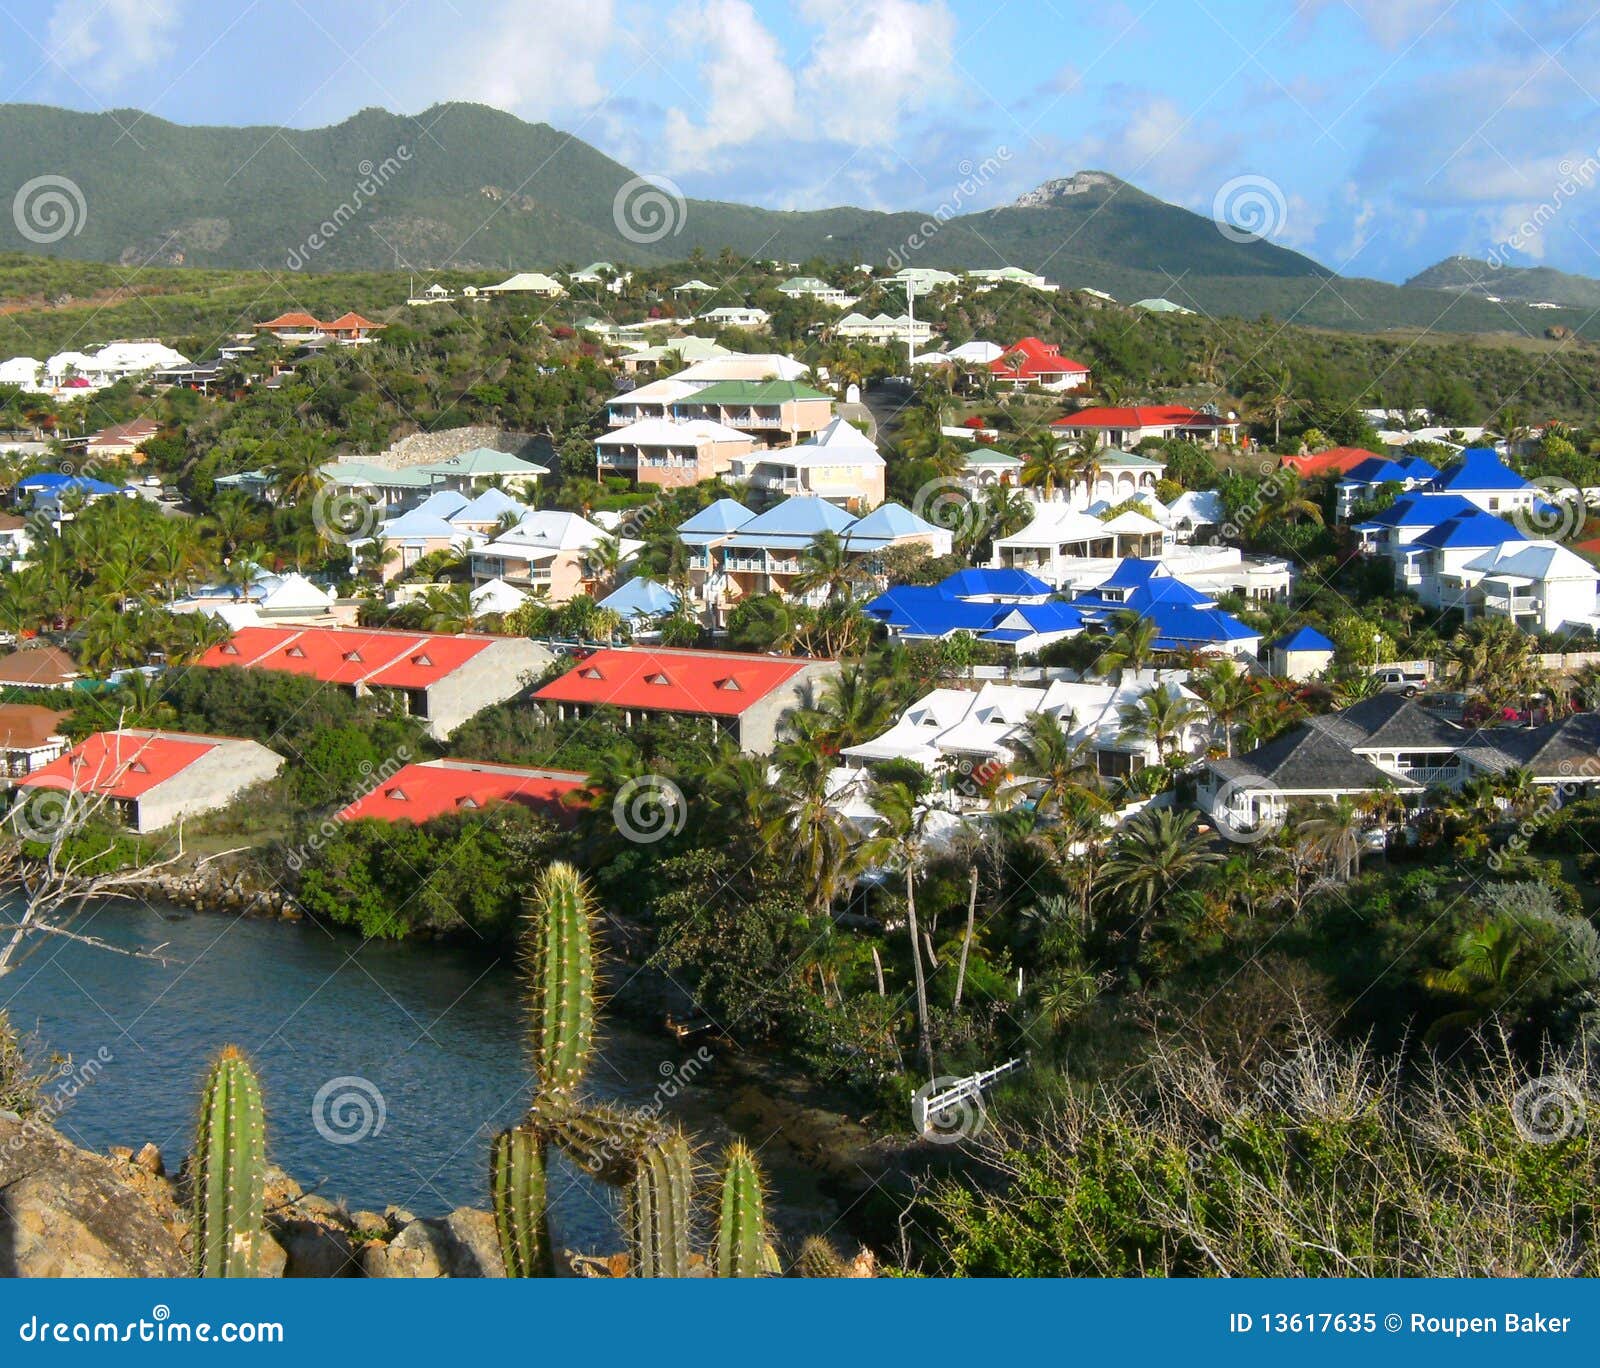 multicolor roofs in st. martin